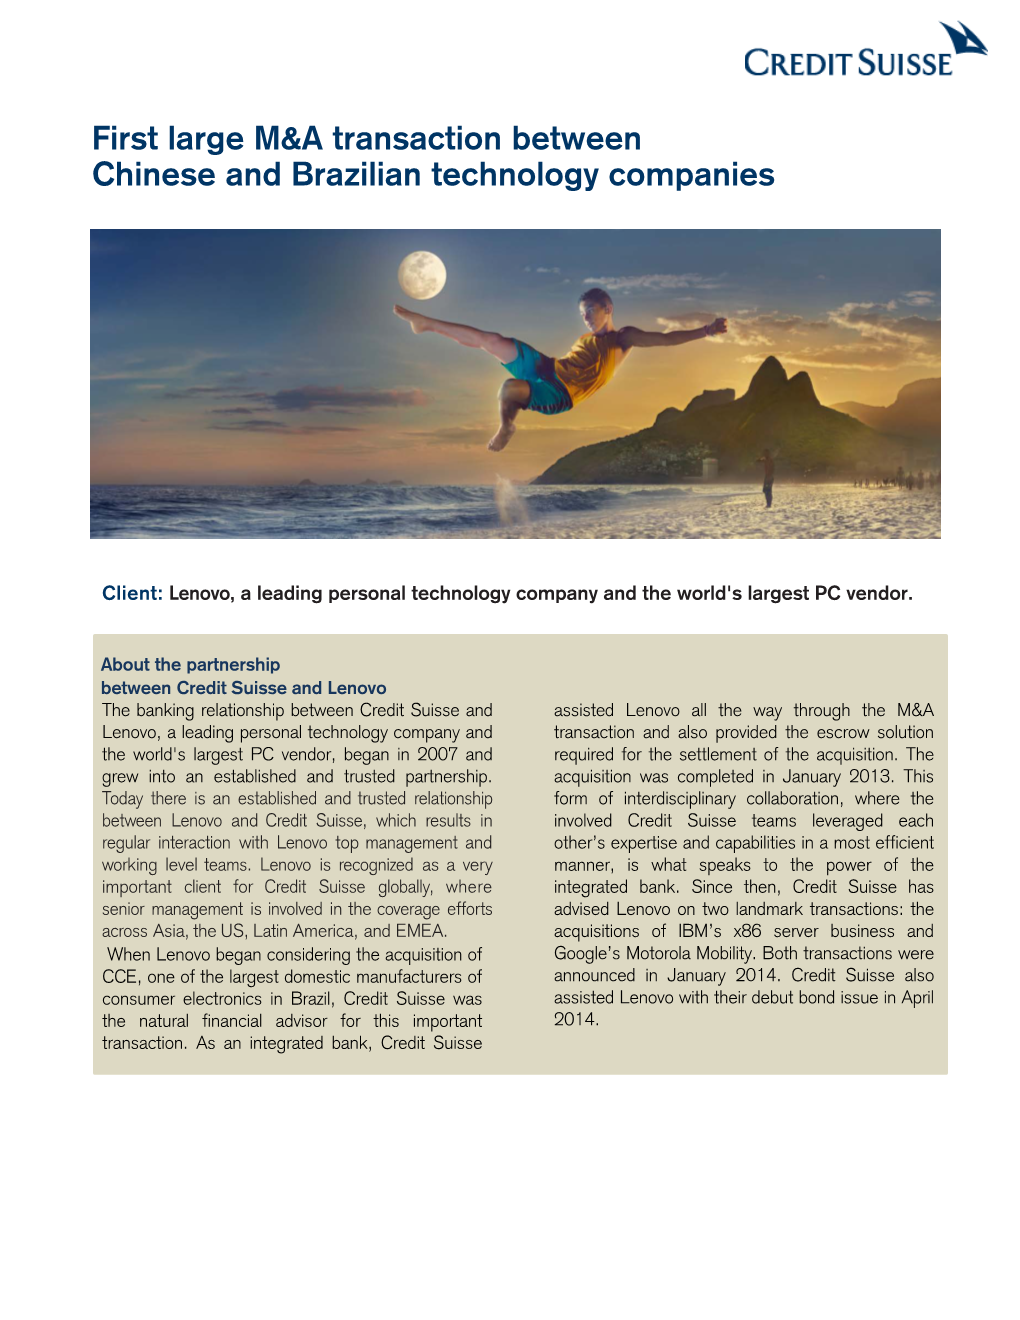 First Large M&A Transaction Between Chinese and Brazilian Technology